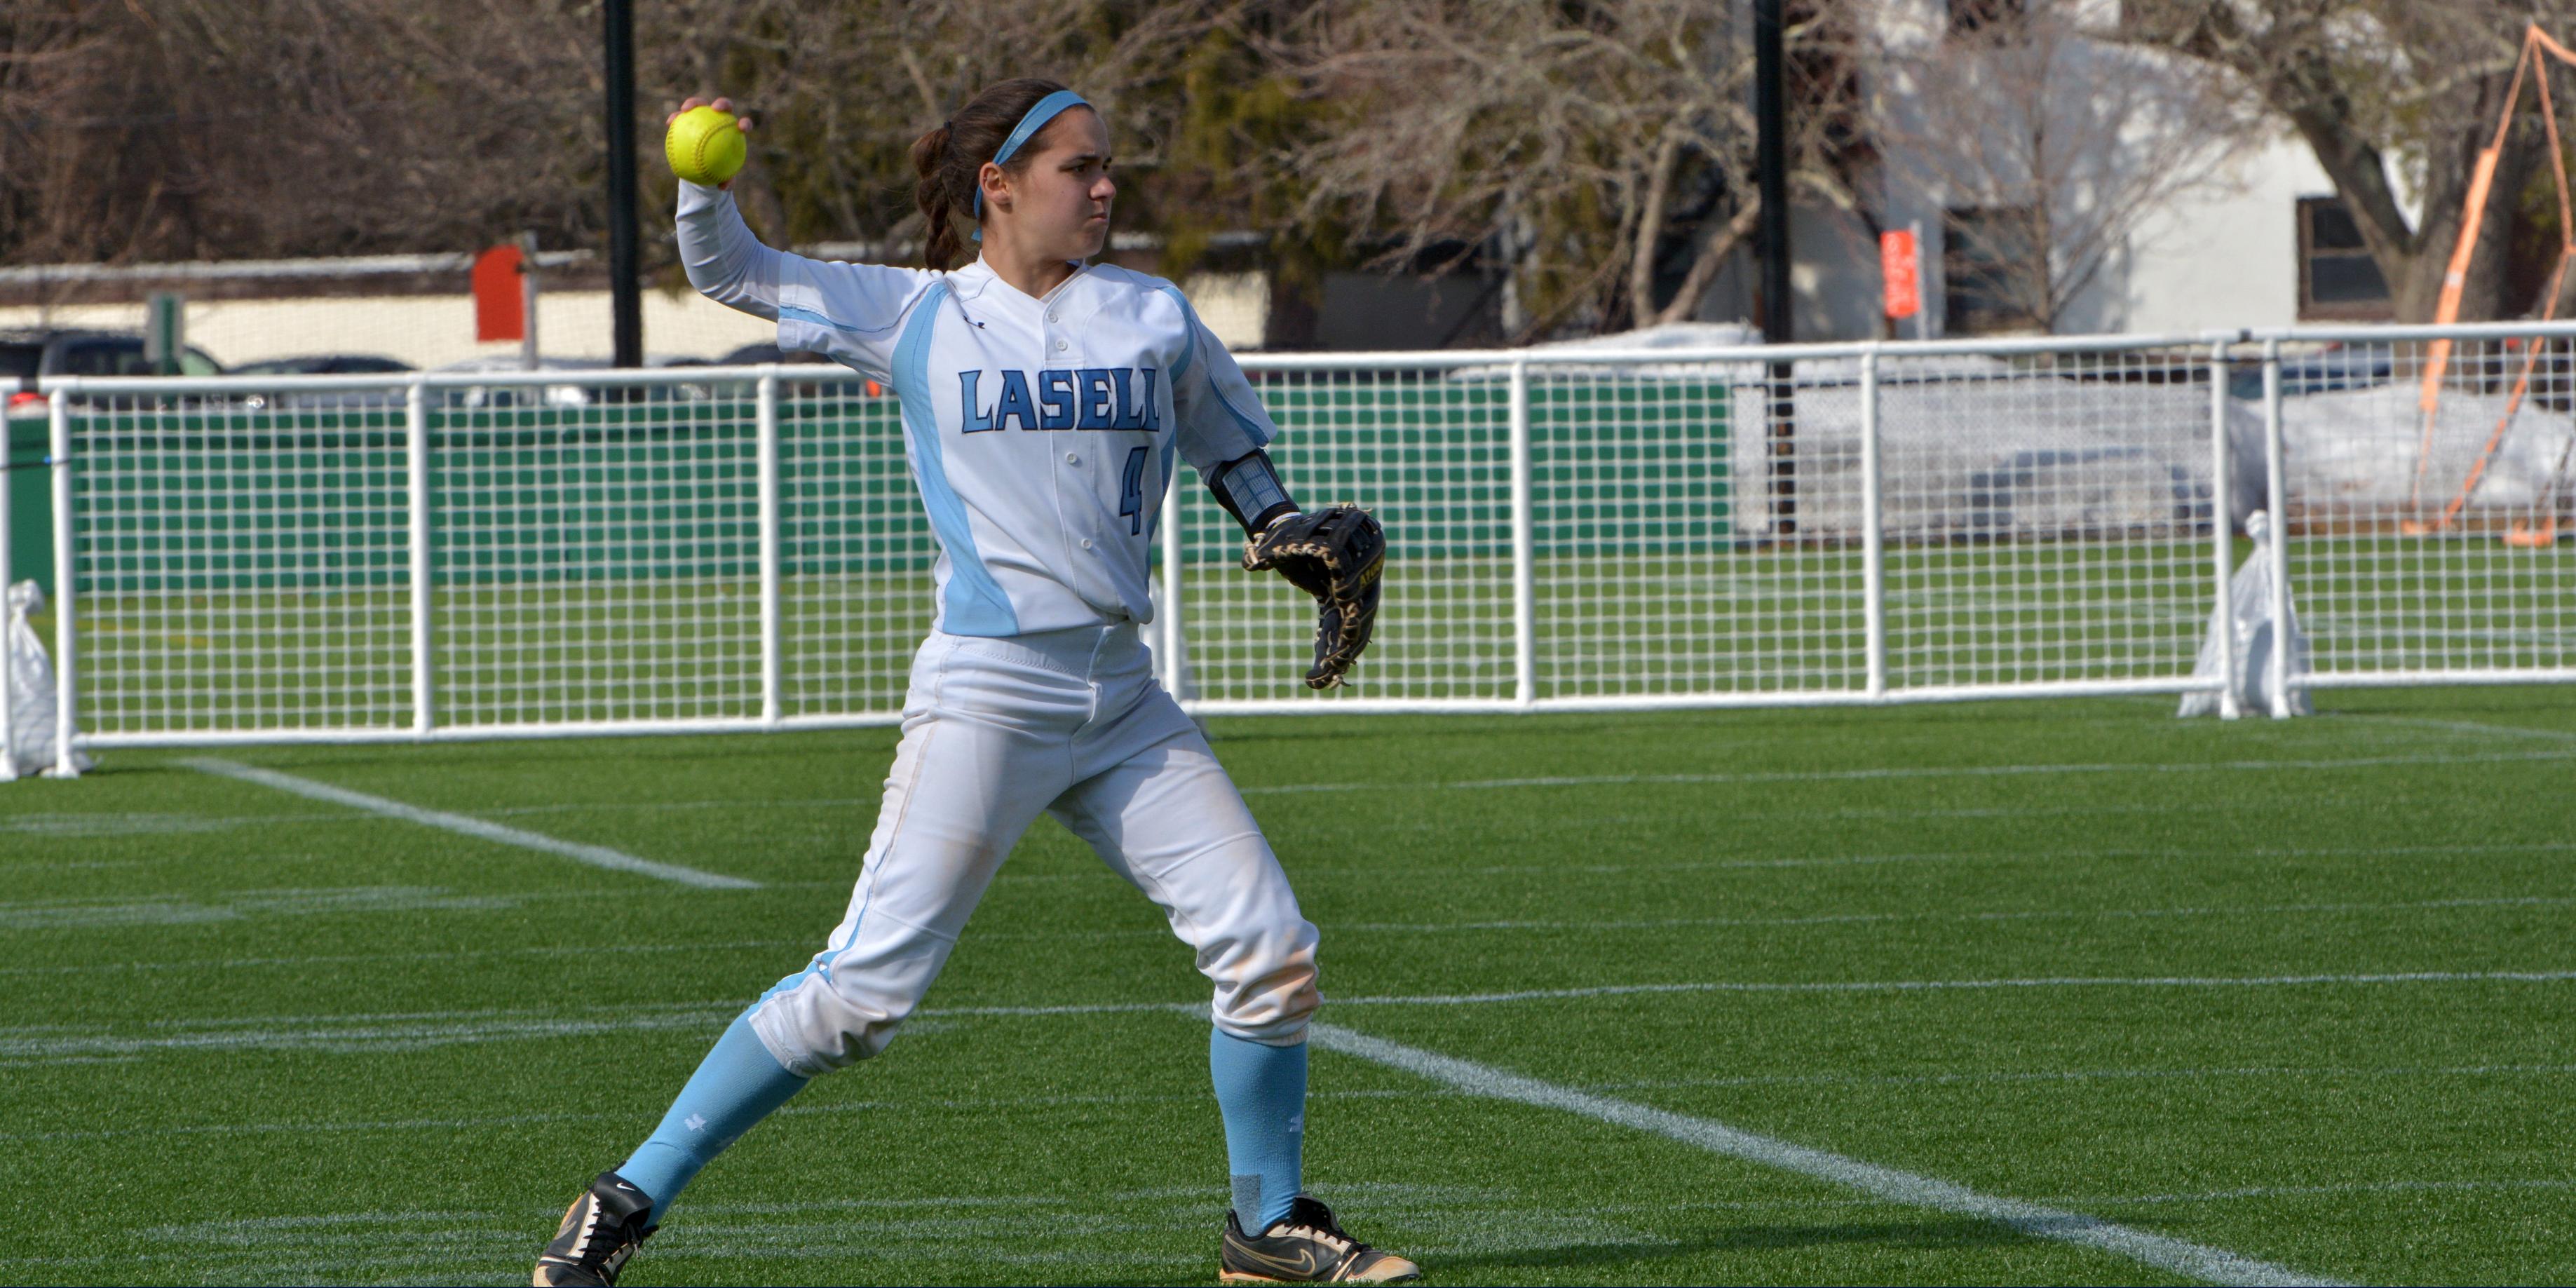 Lasell Drops Two against Simmons